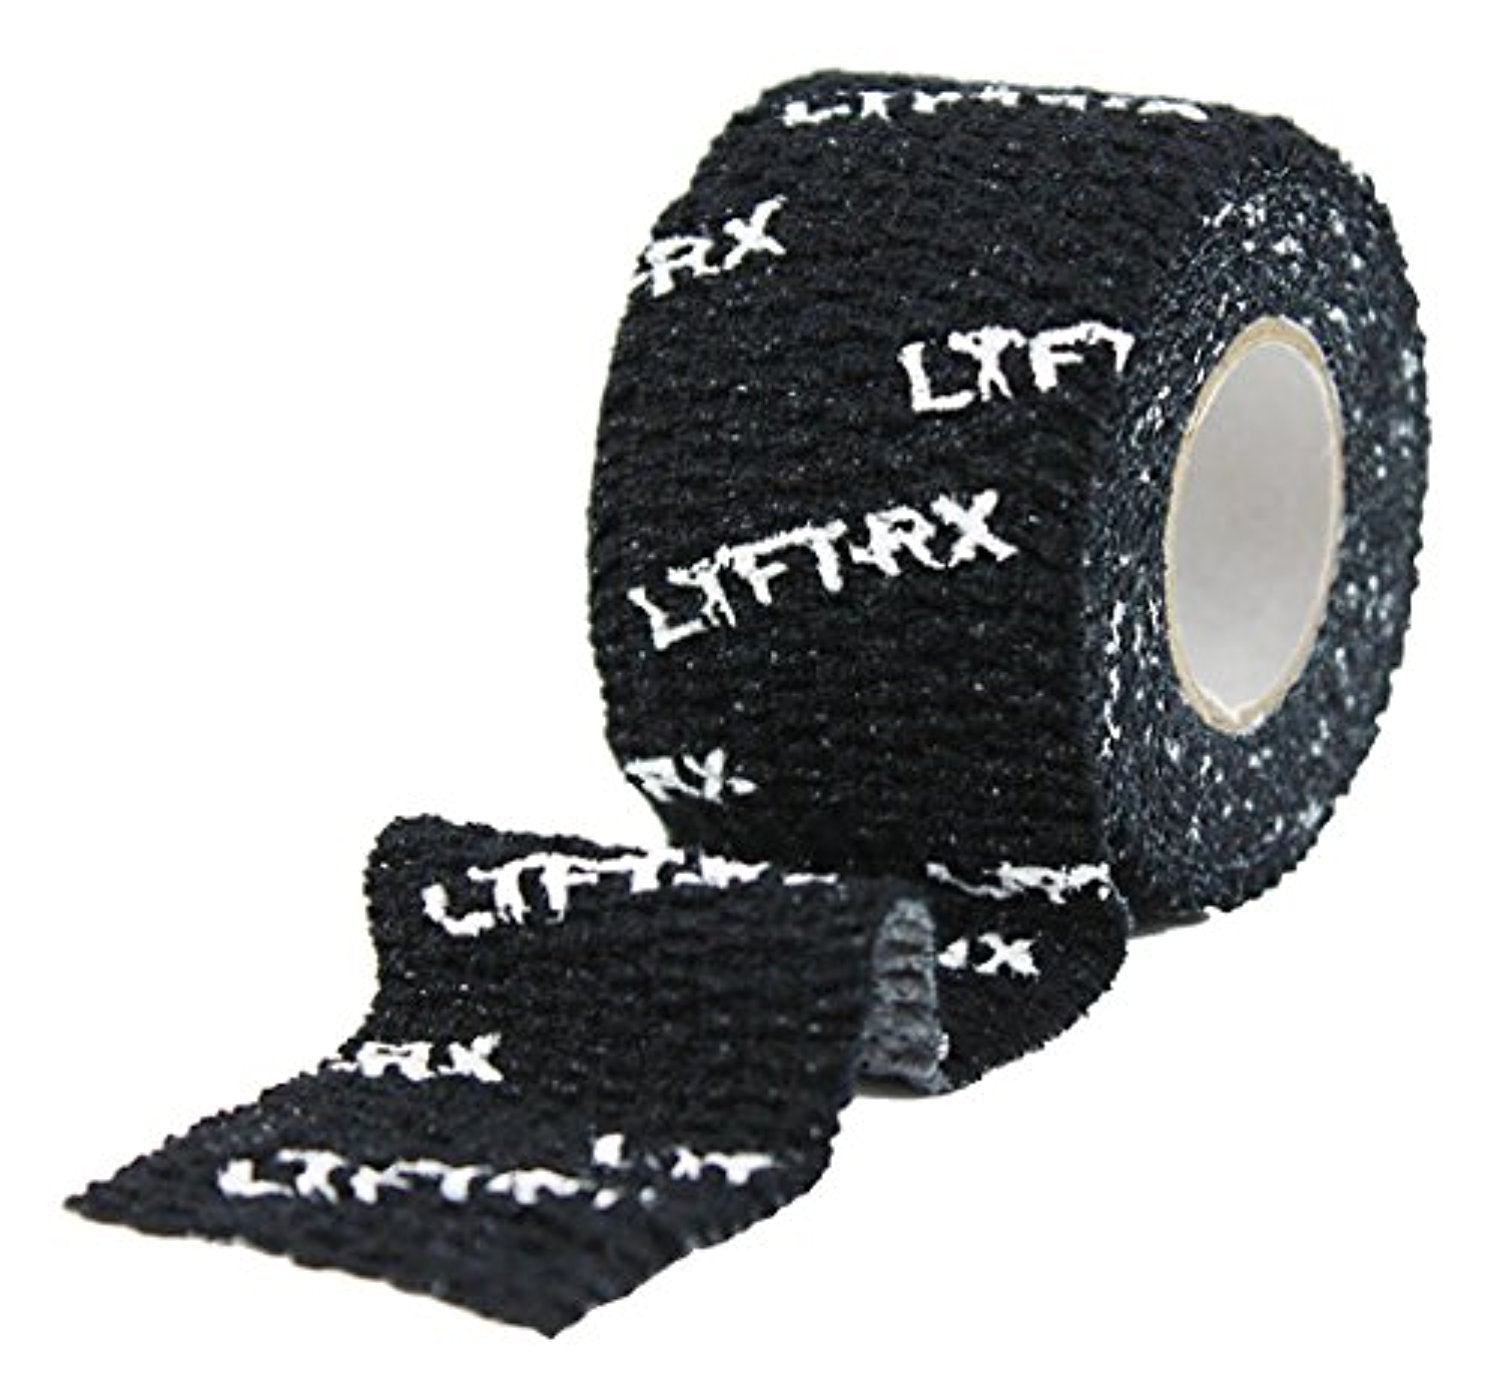 Premium Flex Adhesive Weightlifting Tape - Best for any Weightlifting & Crossfit - Everyday Crosstrain